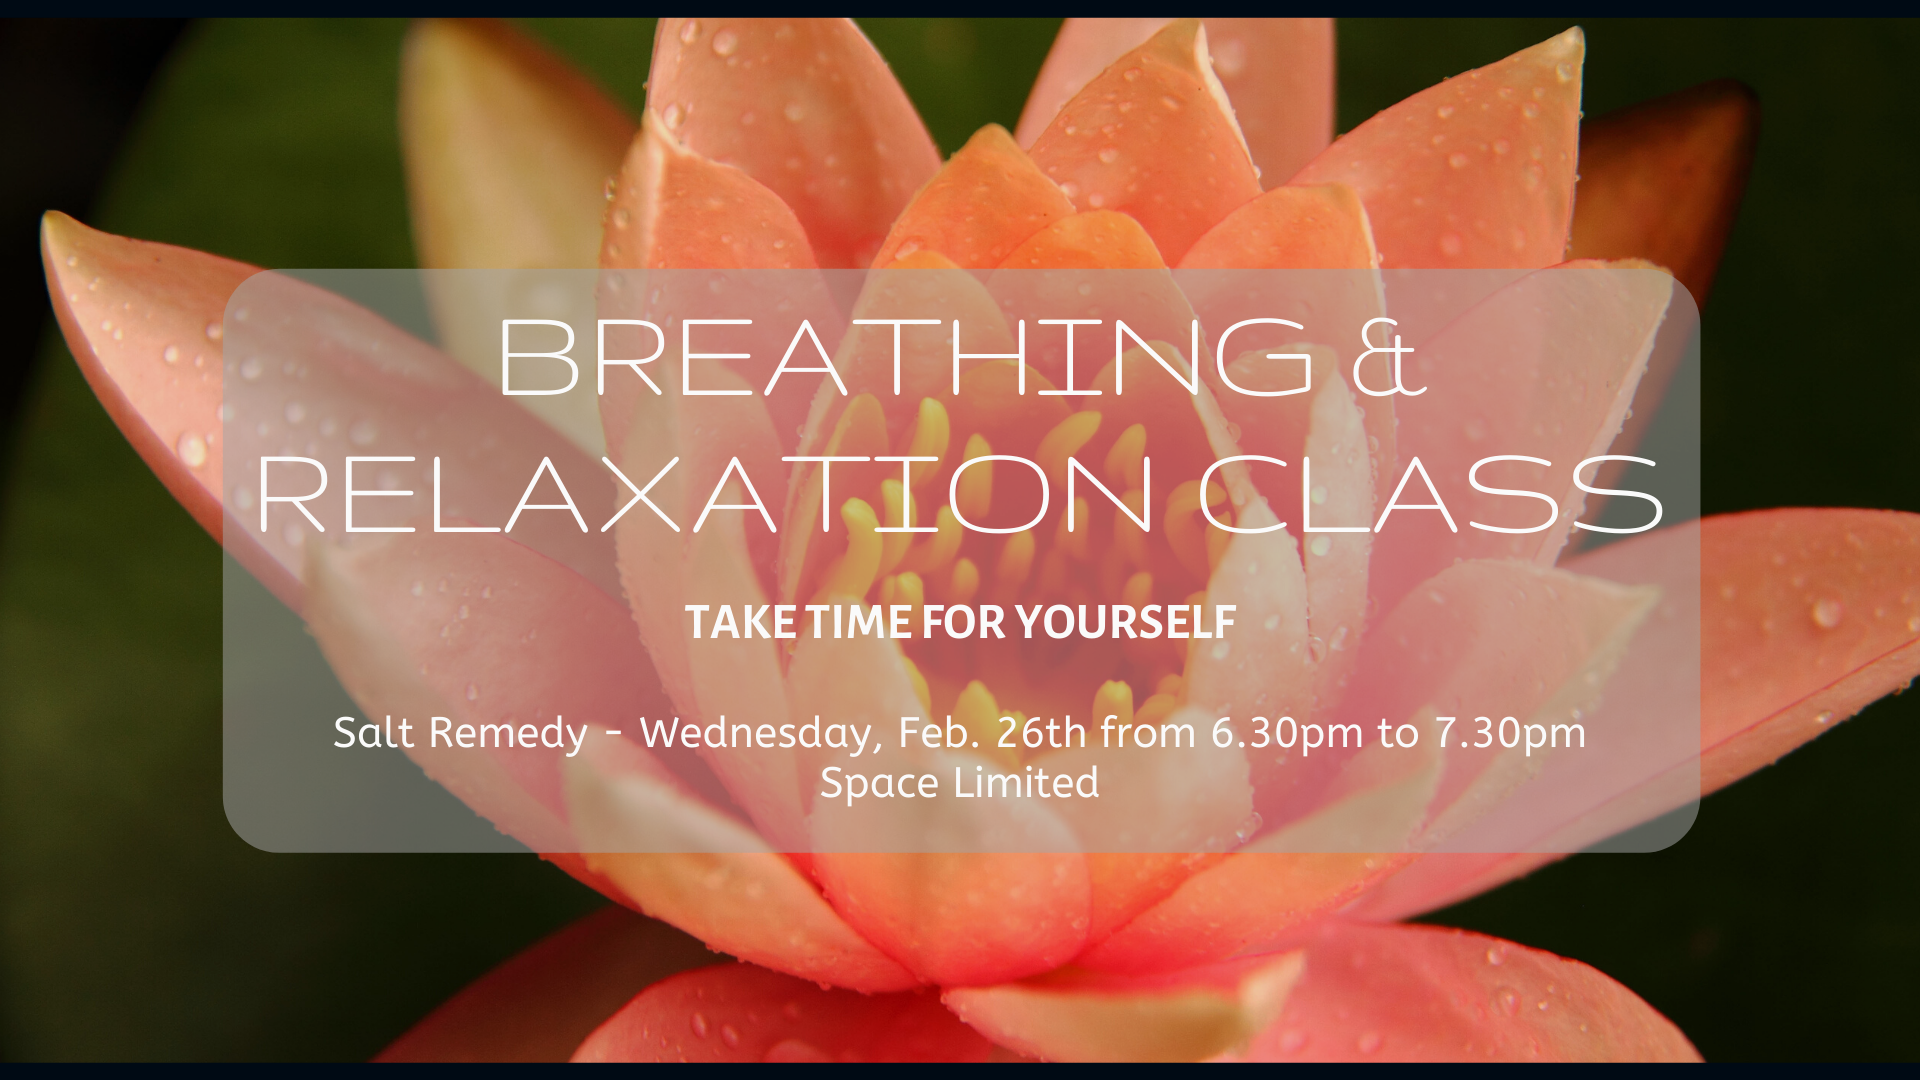 Breathing & Relaxation Class